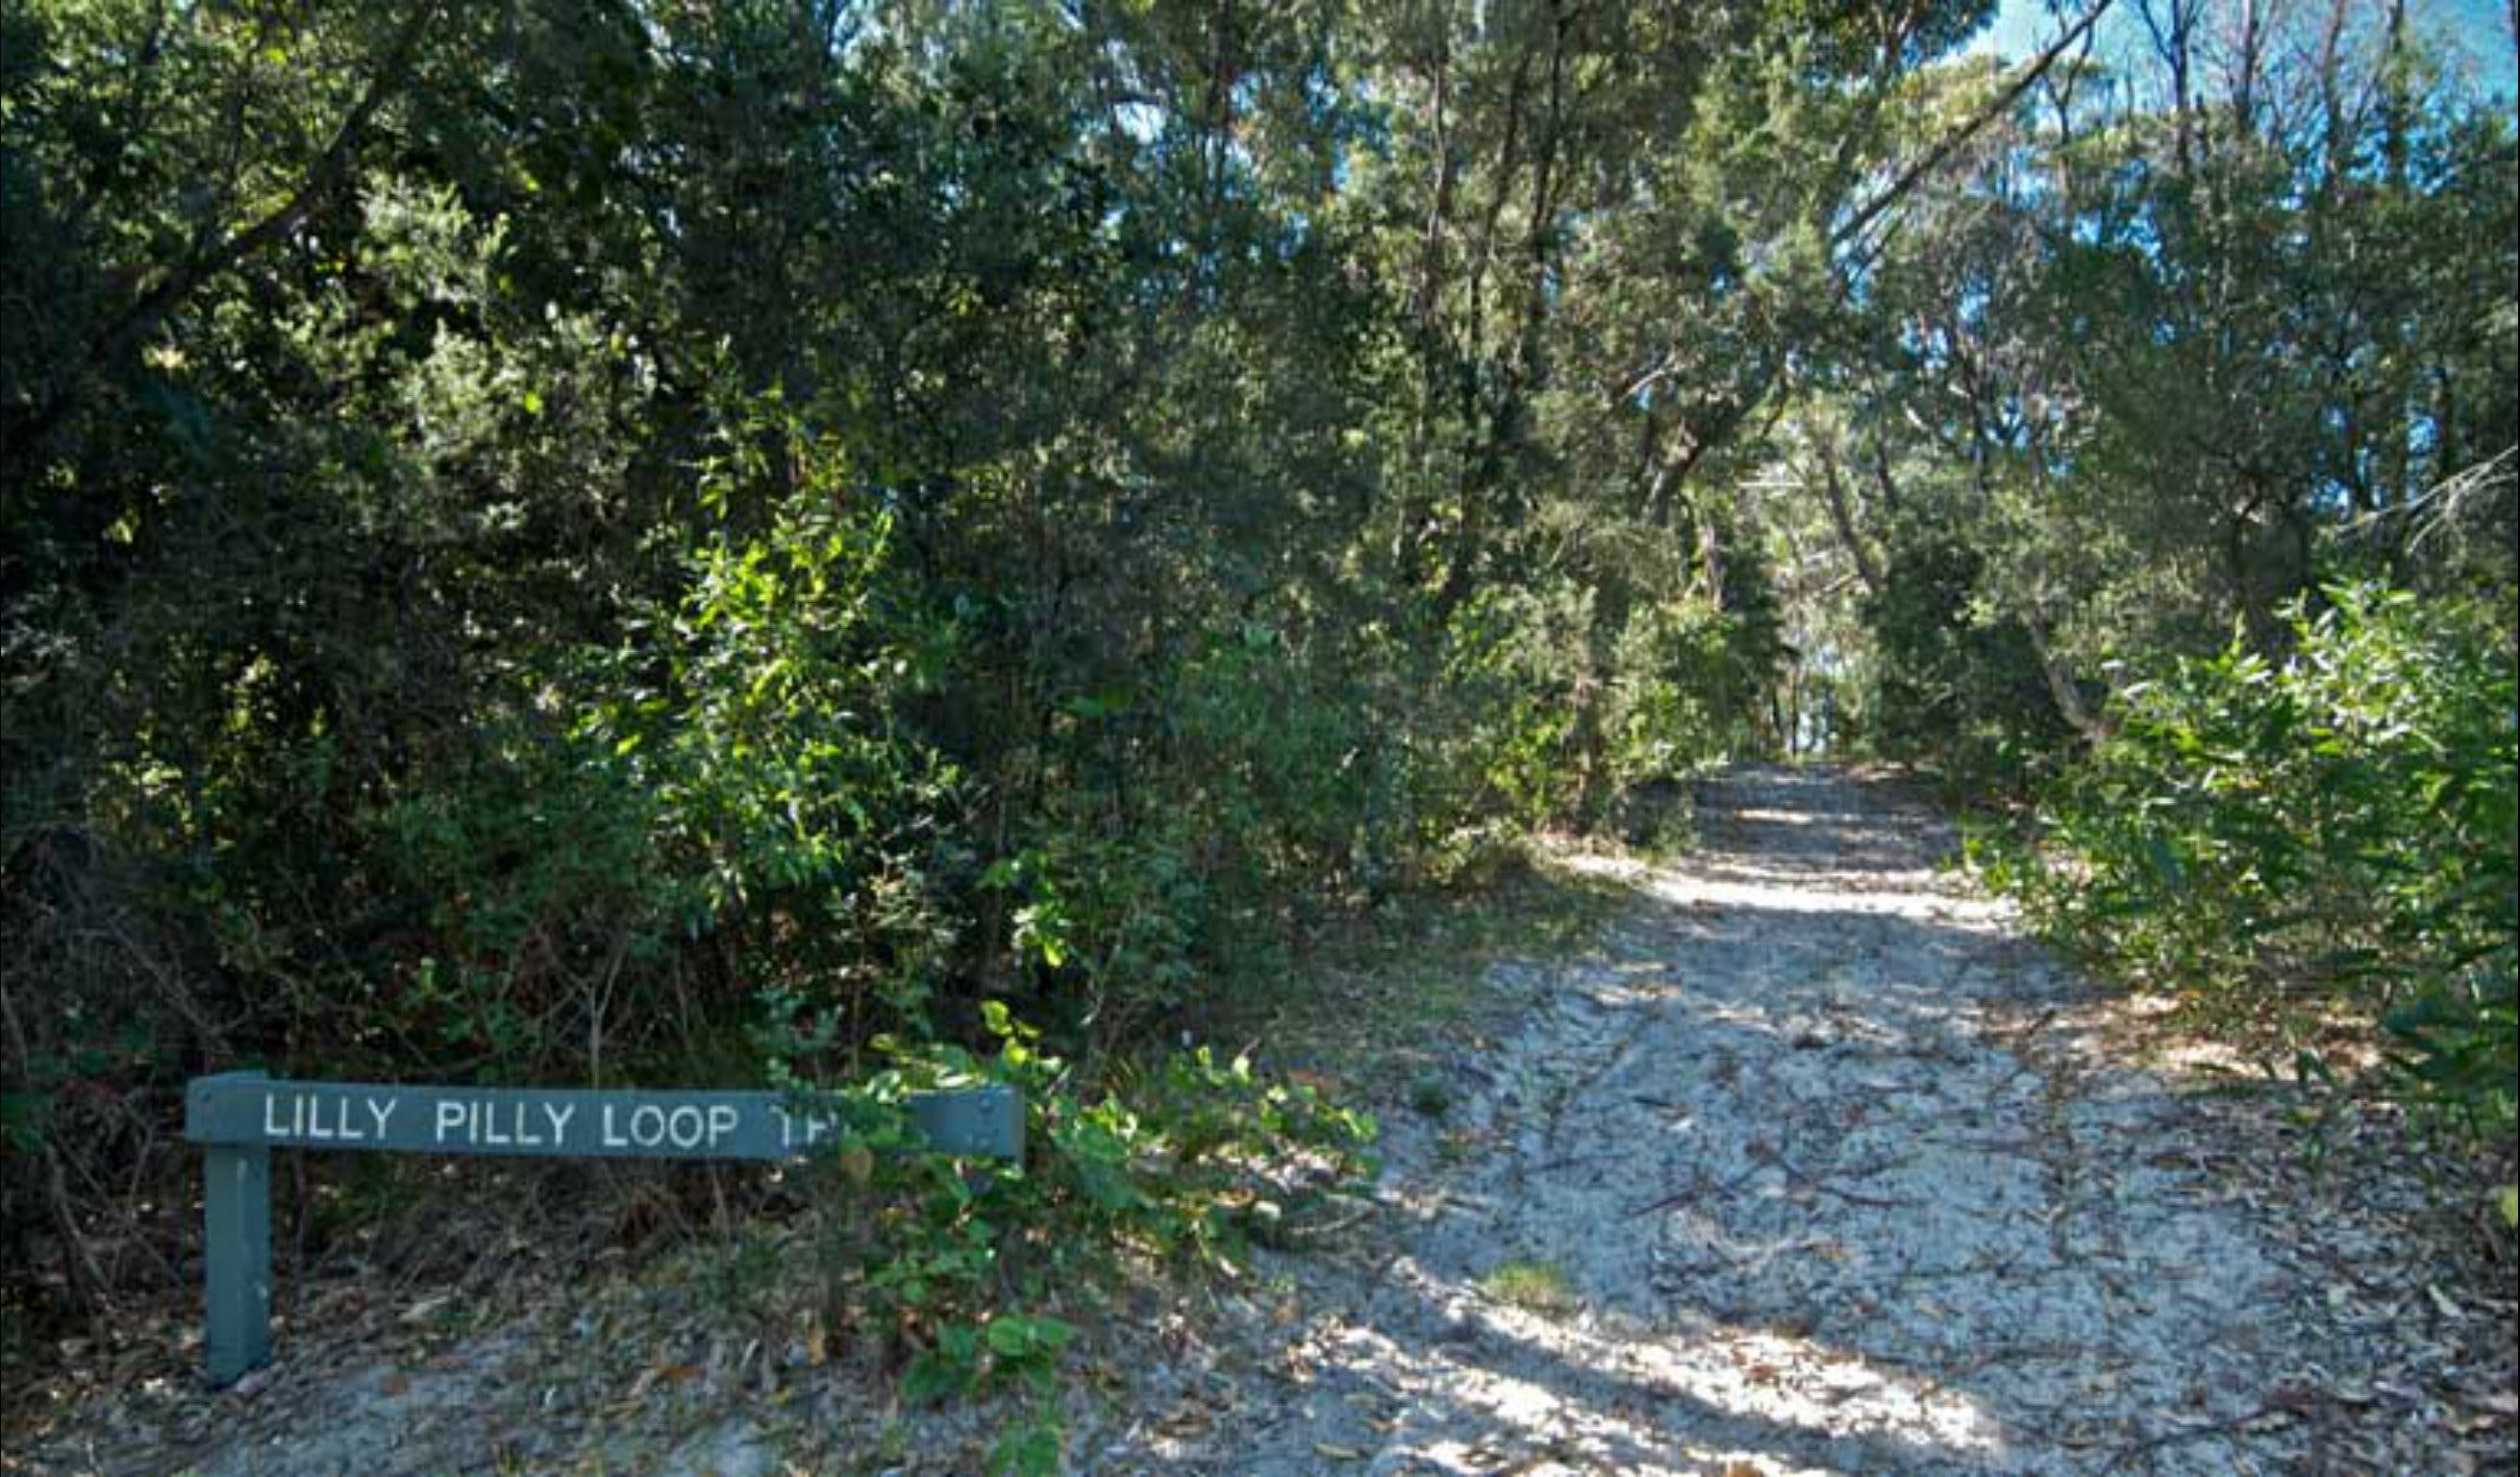 Lillypilly loop trail